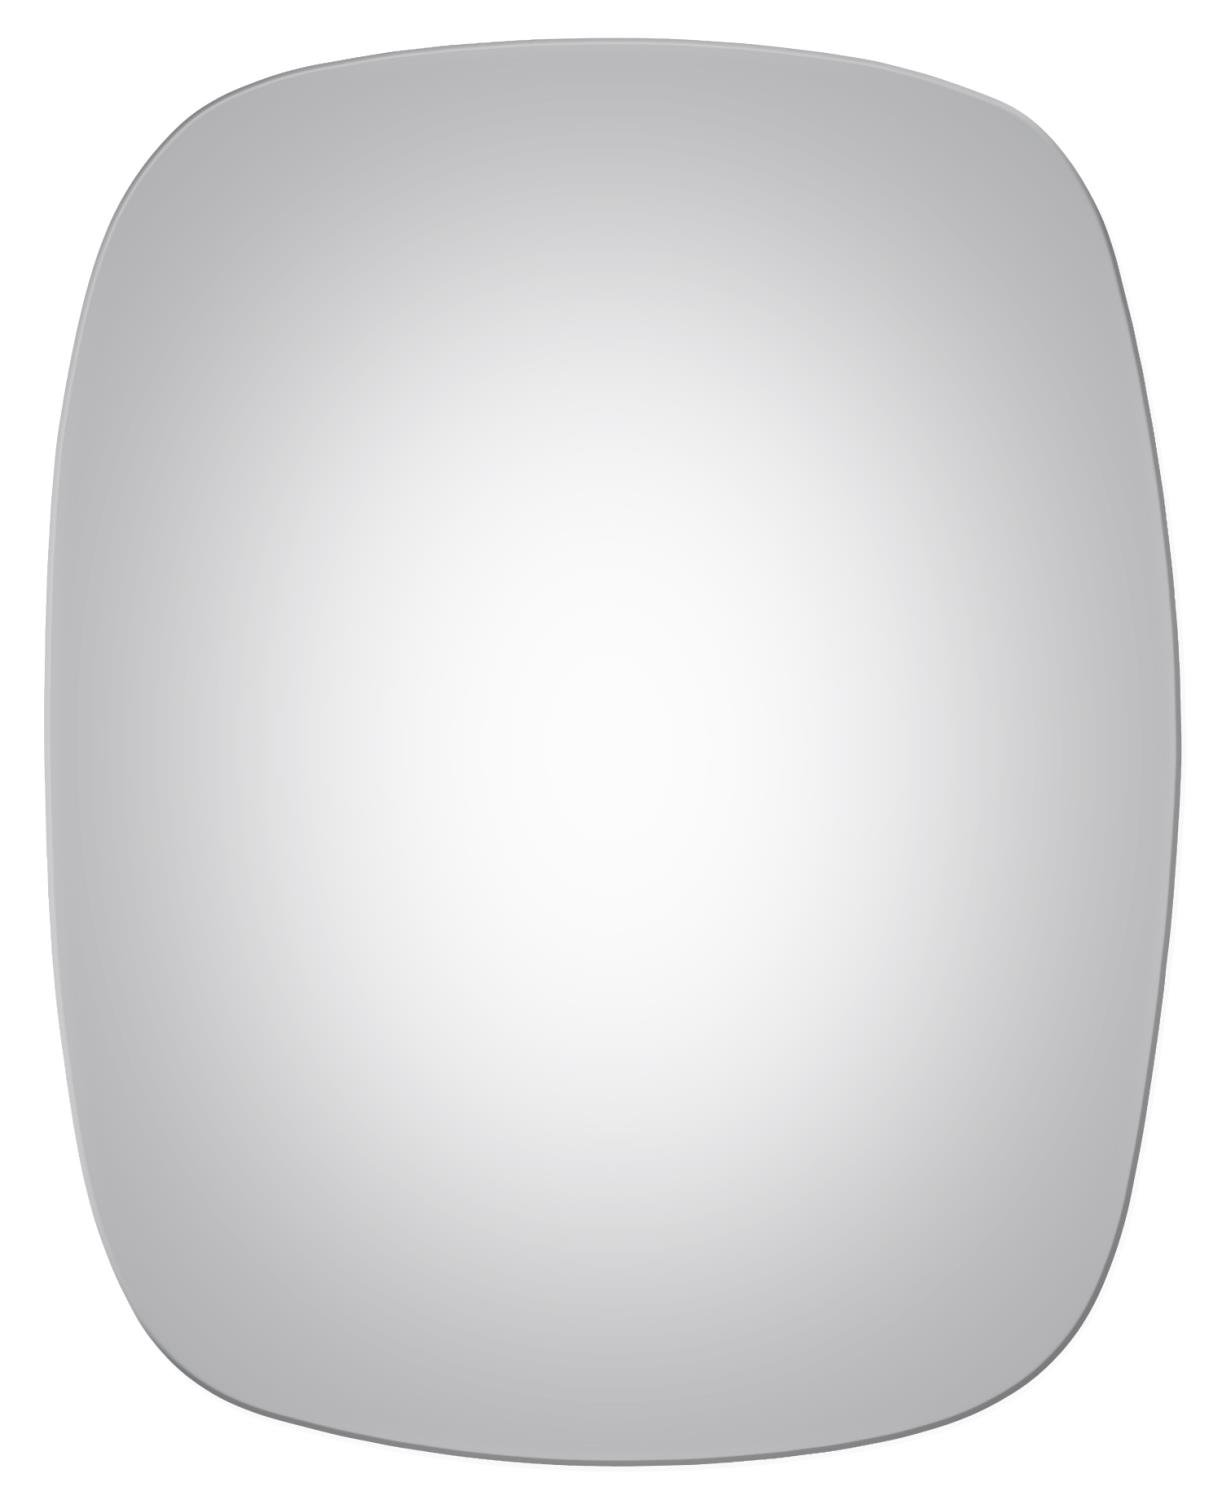 2209 SIDE VIEW MIRROR